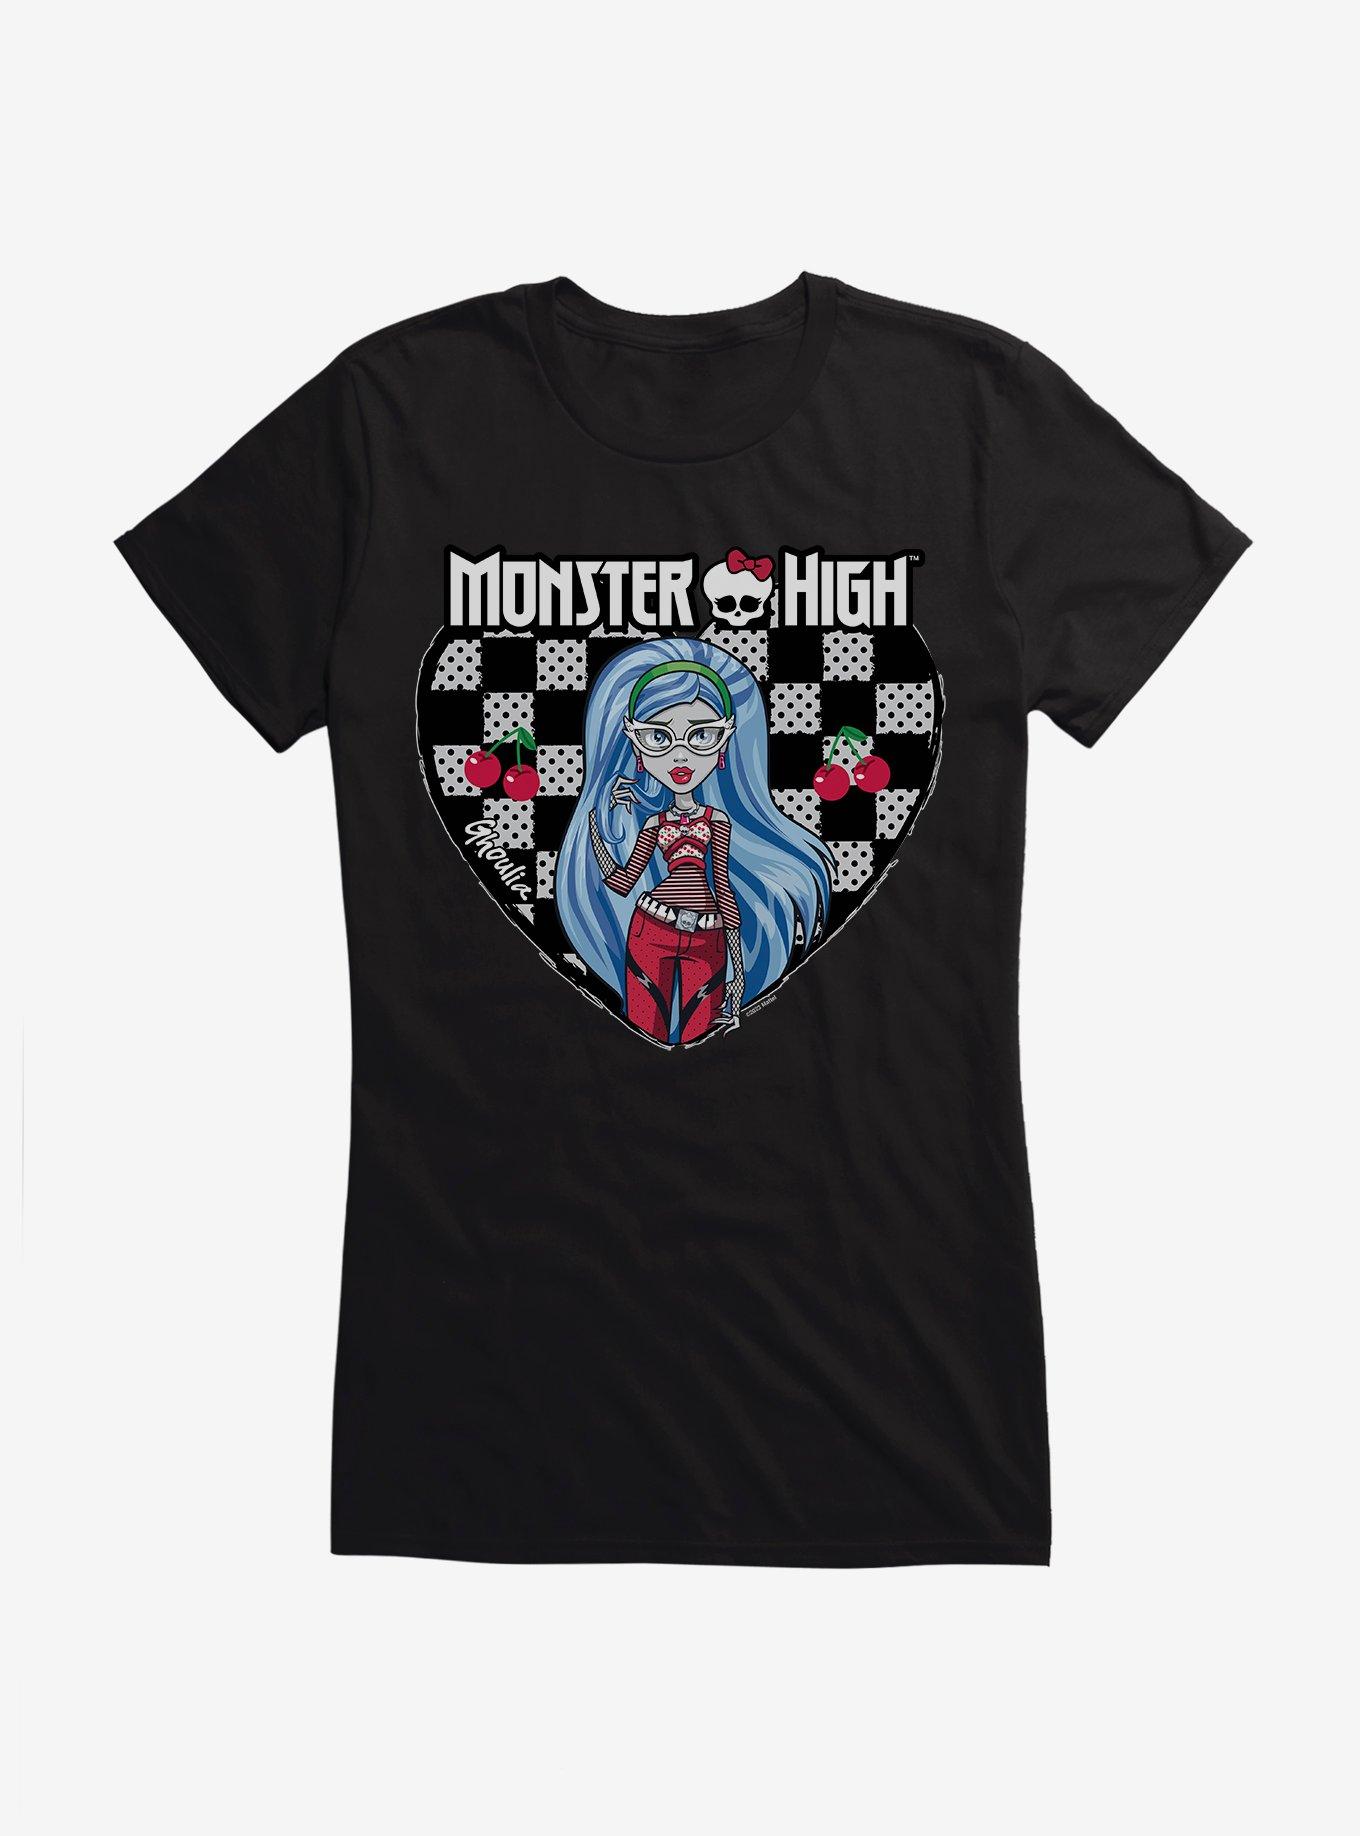 Monster High Ghoulia Yelps Checkerboard Heart Girls T-Shirt, BLACK, hi-res